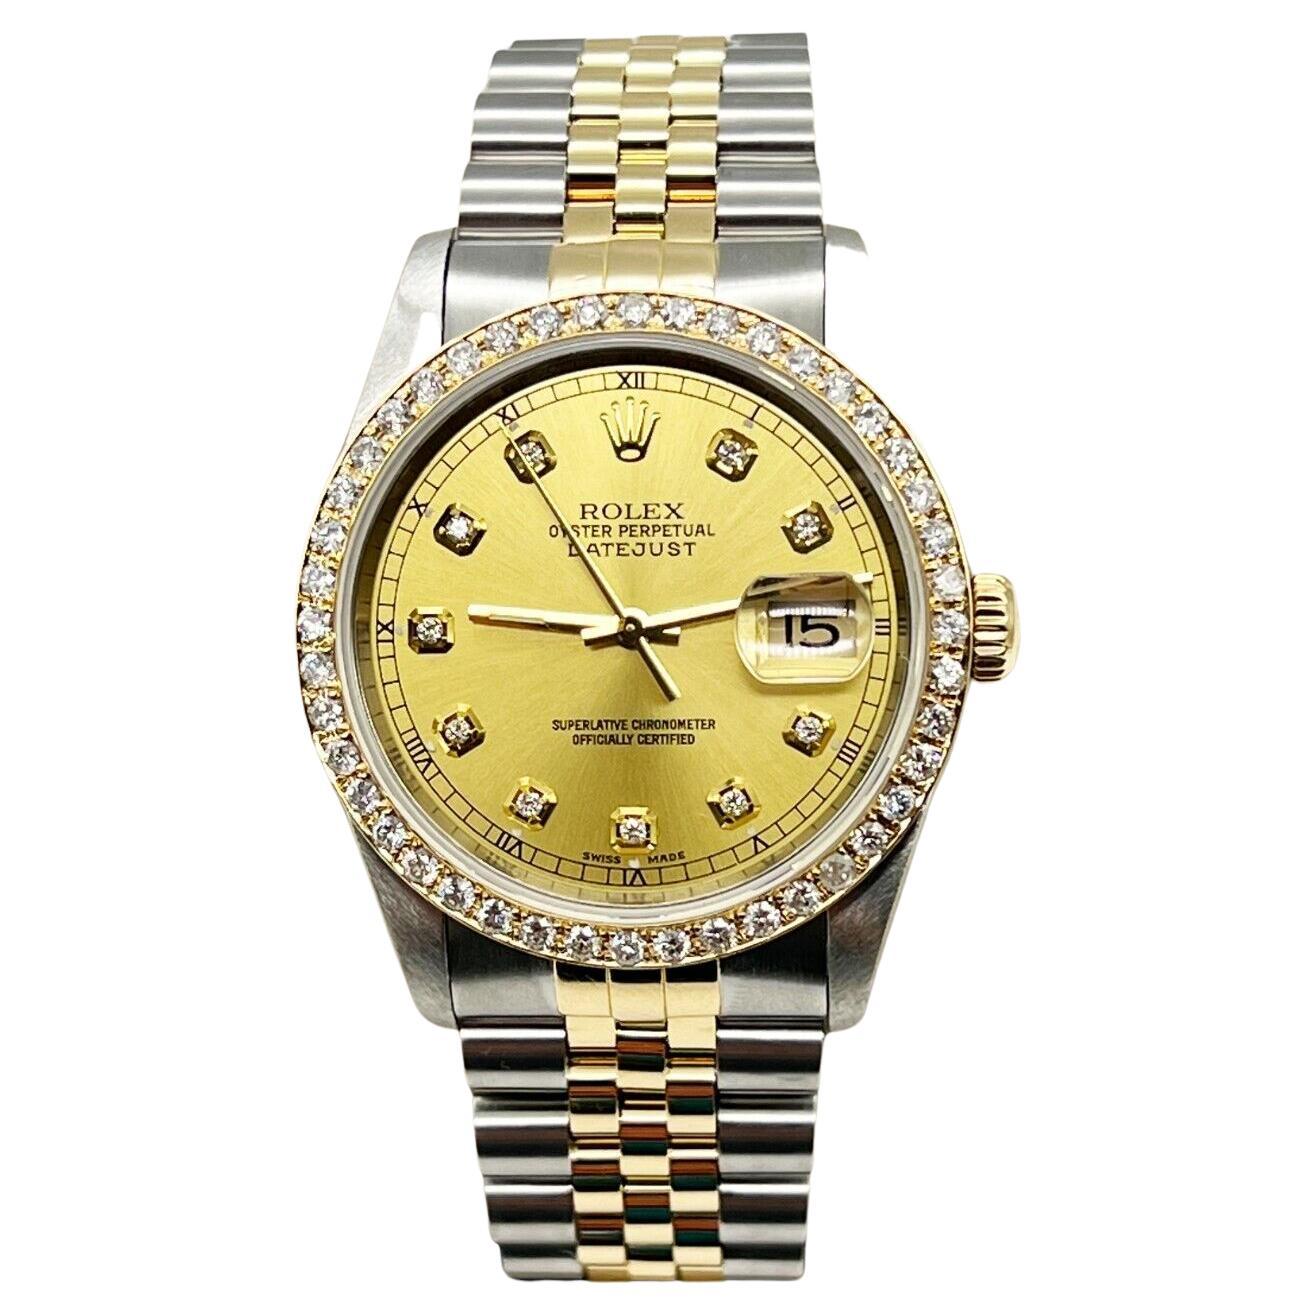 Rolex Datejust 16233 Champagne Diamond Dial 18K Yellow Gold Stainless